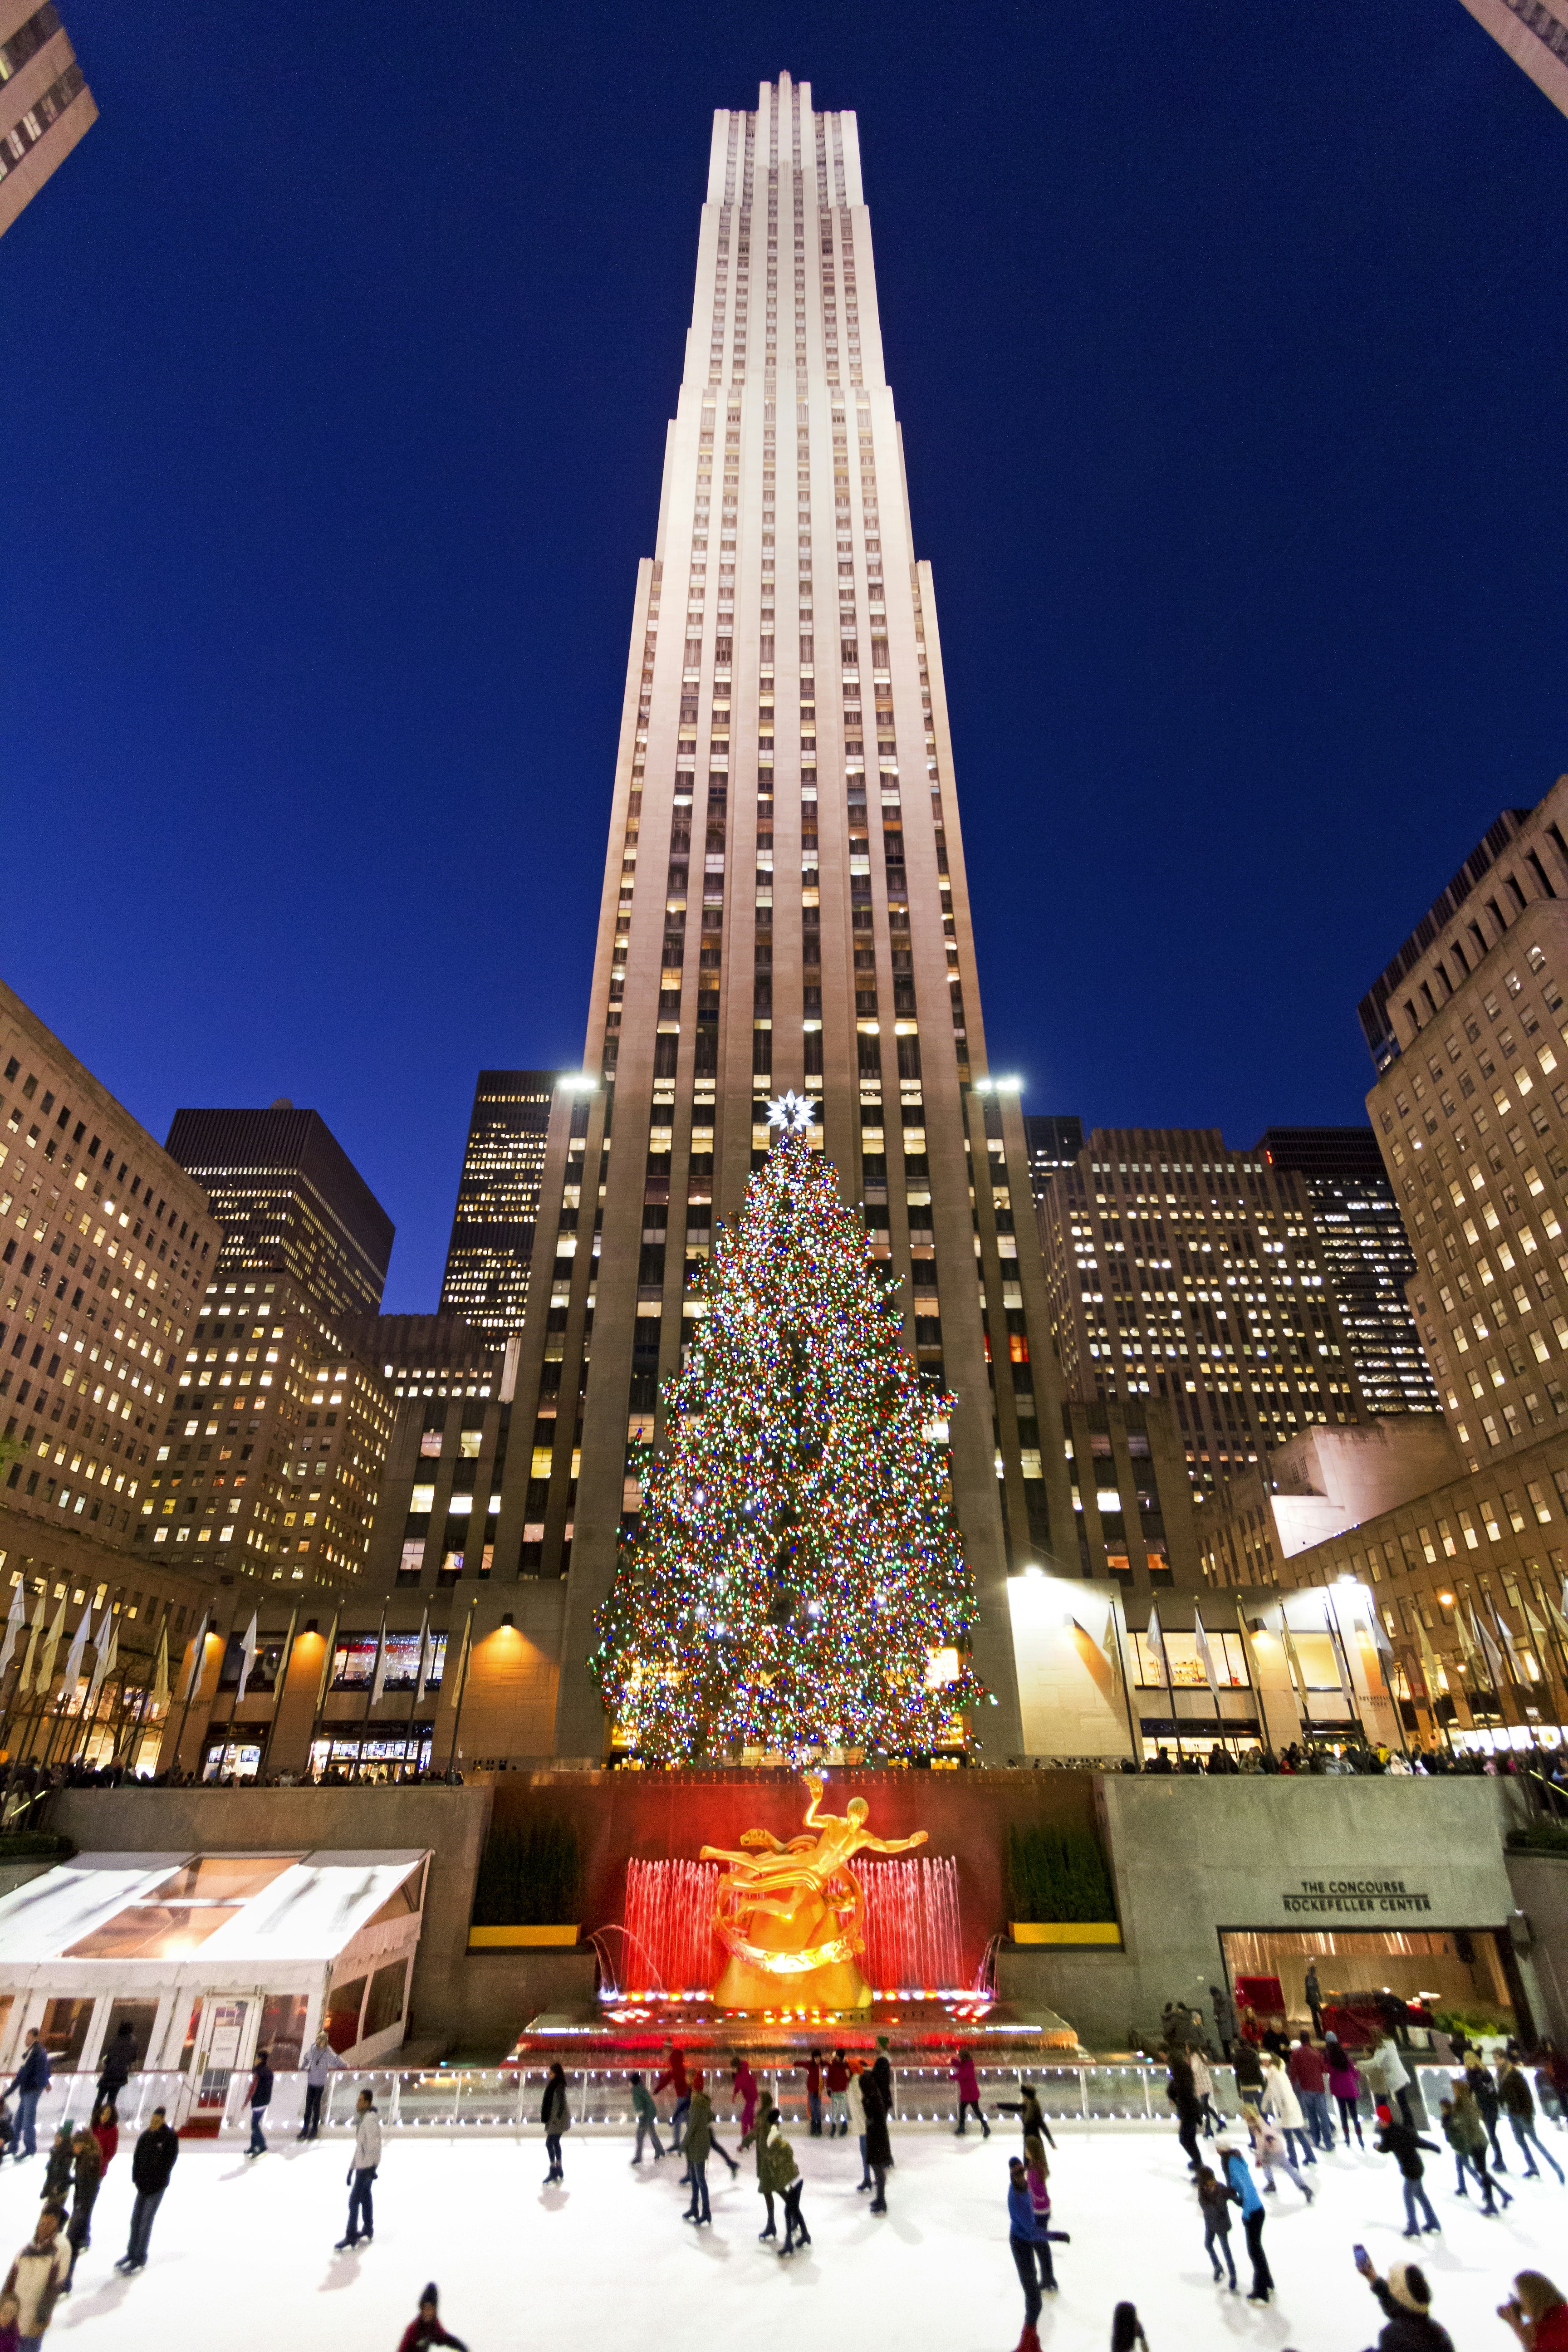 A tall building stands behind a large colorfully lit Christmas tree in front of which is the golden statue of Prometheus while people skate in front 